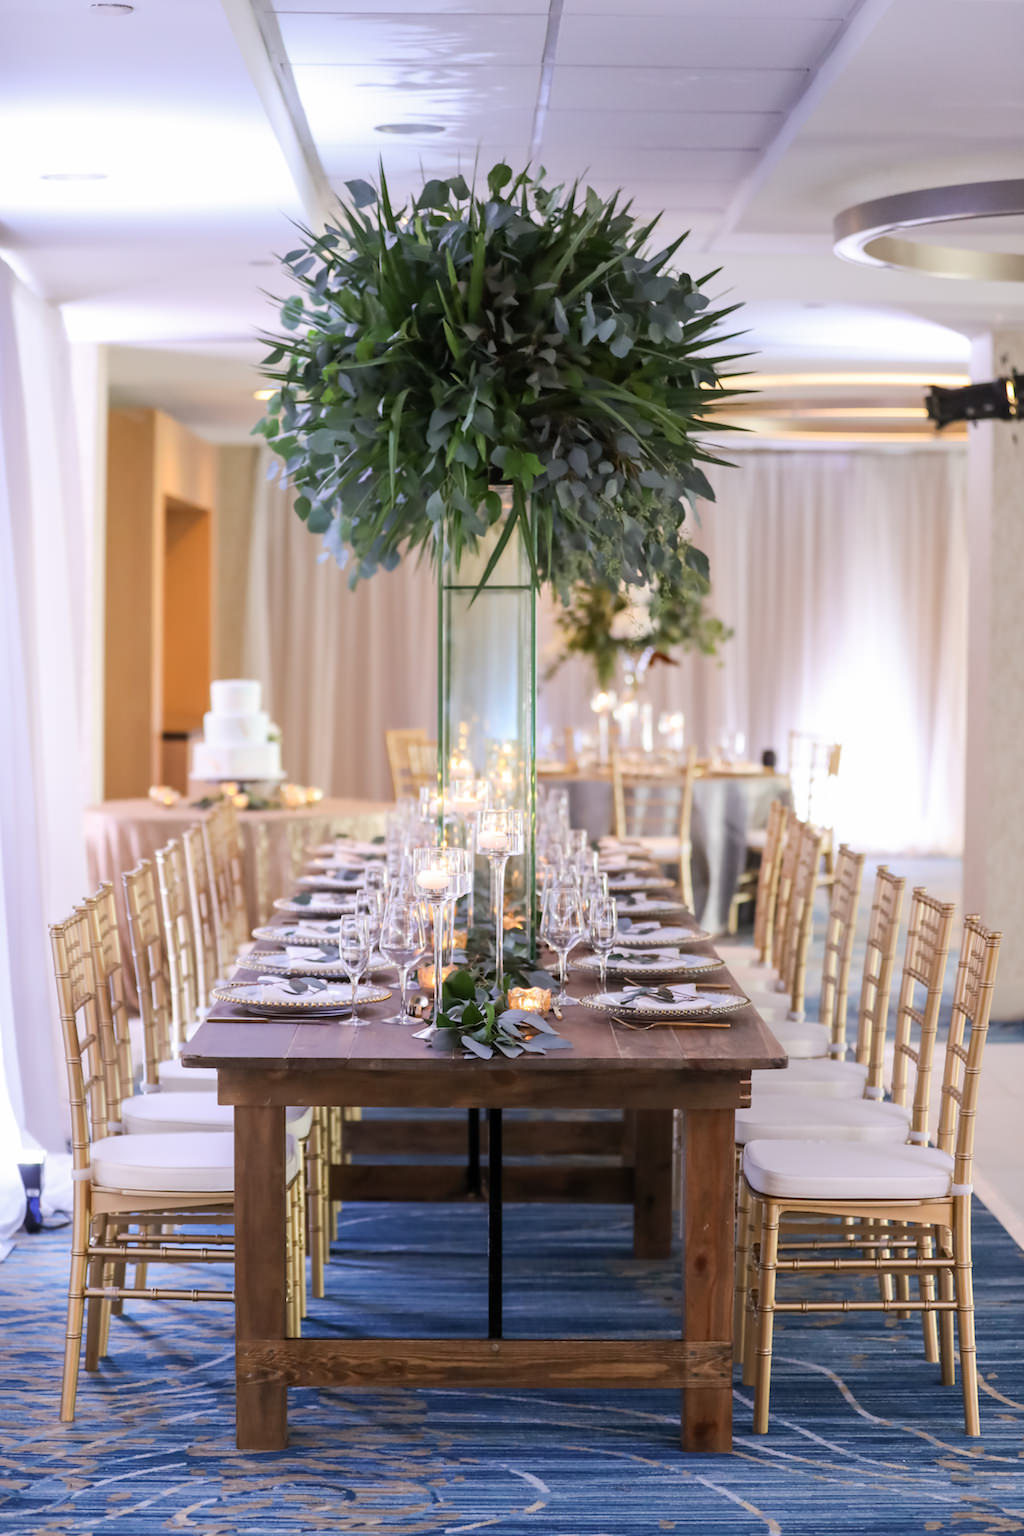 Hotel Ballroom Wedding Reception With Long Wood Feasting Table, Extra Tall Greenery Centerpiece in Clear Glass Rectangular Vases, Gold Chiavari Chairs, White Draping, and Glass Candleholders at Varying Heights and Gold Beaded Glass Chargers | Beach Hotel Wedding Venue Hilton Clearwater Beach